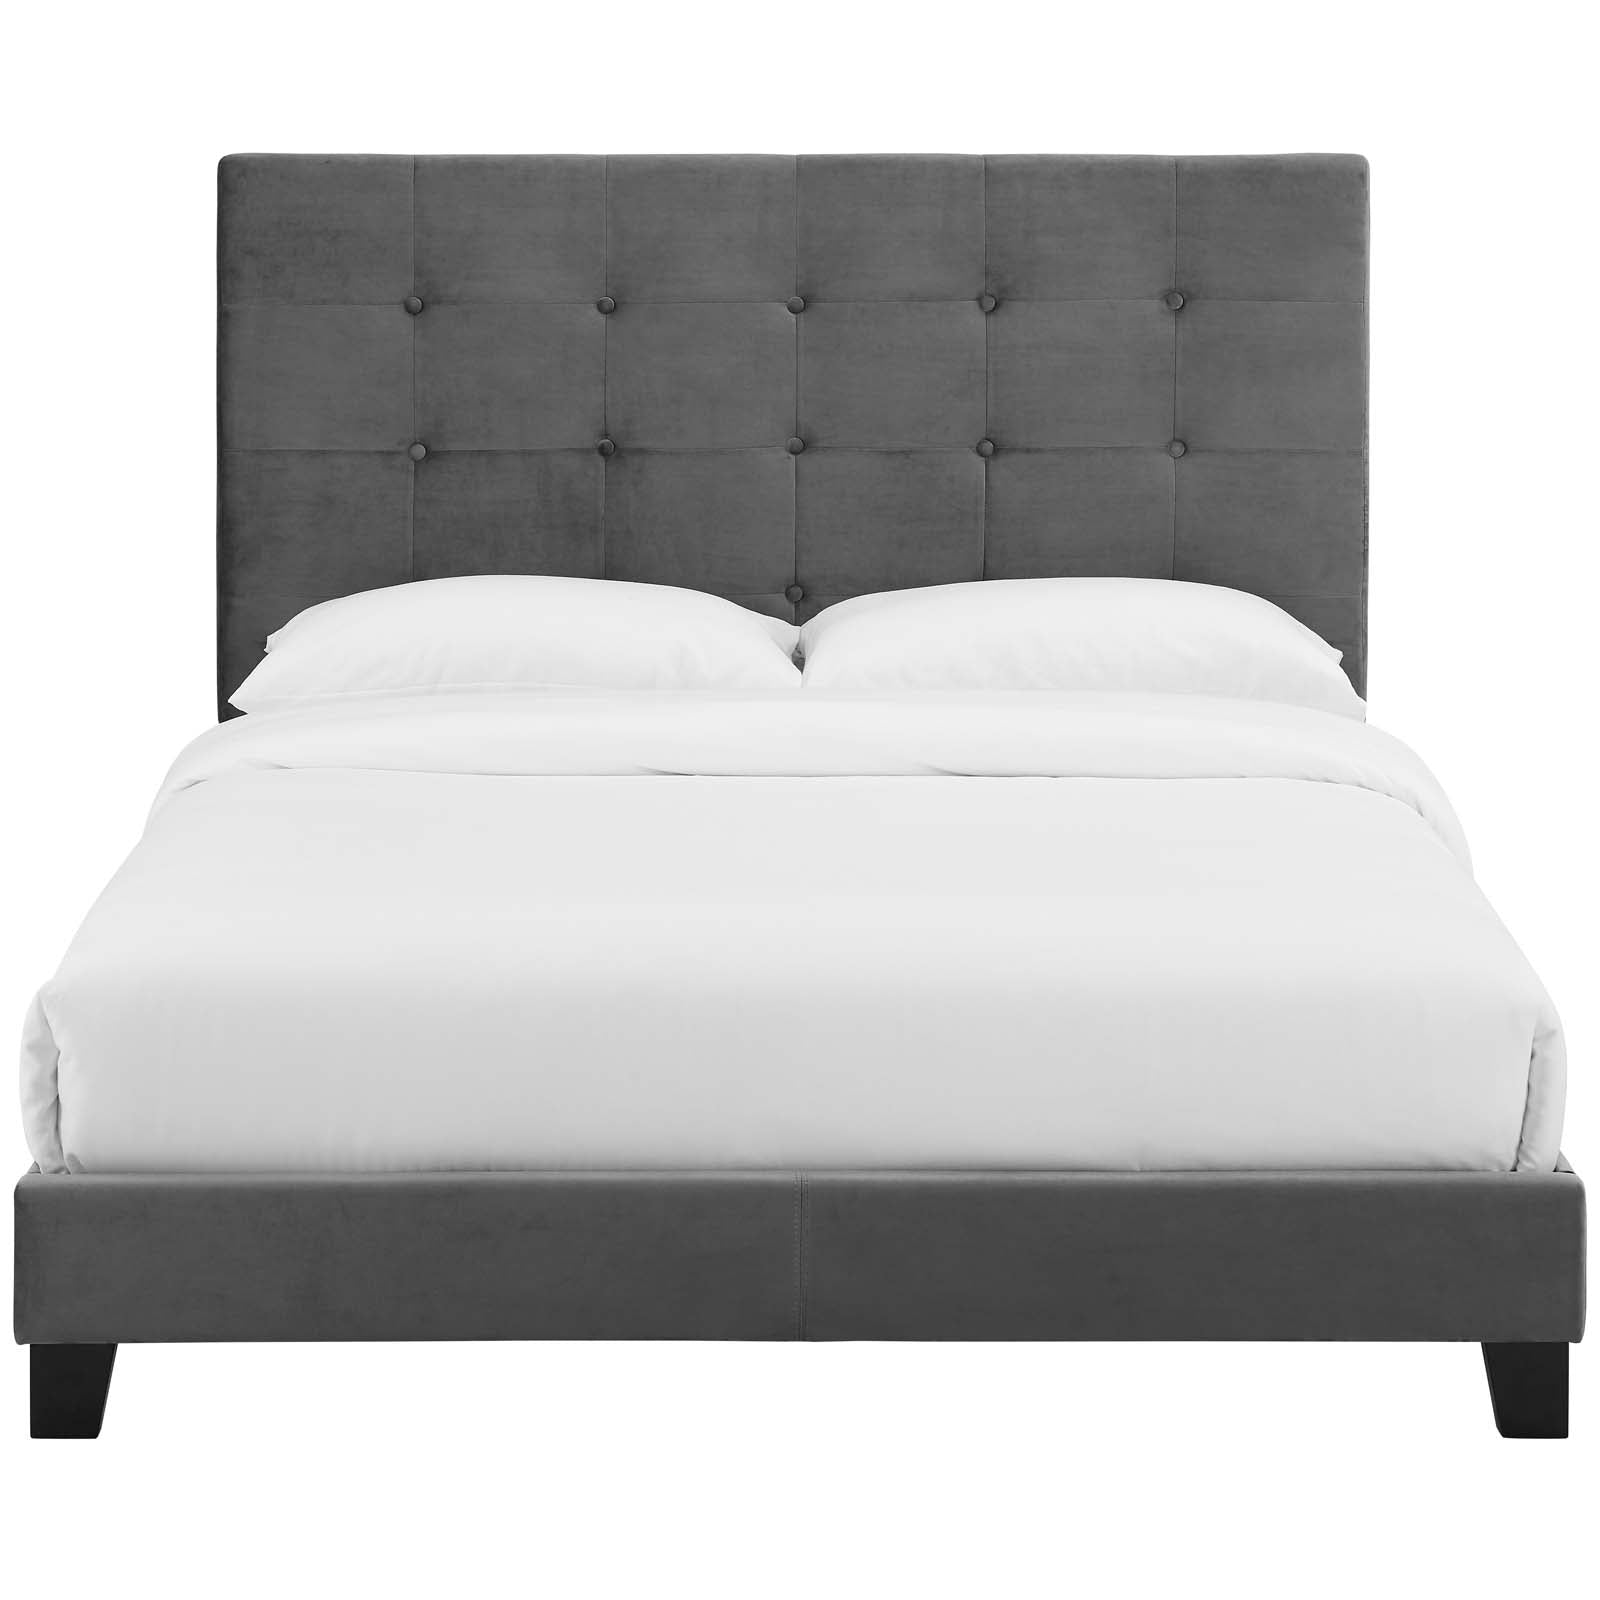 Modway Beds - Melanie Tufted Button Upholstered Platform King Bed Gray